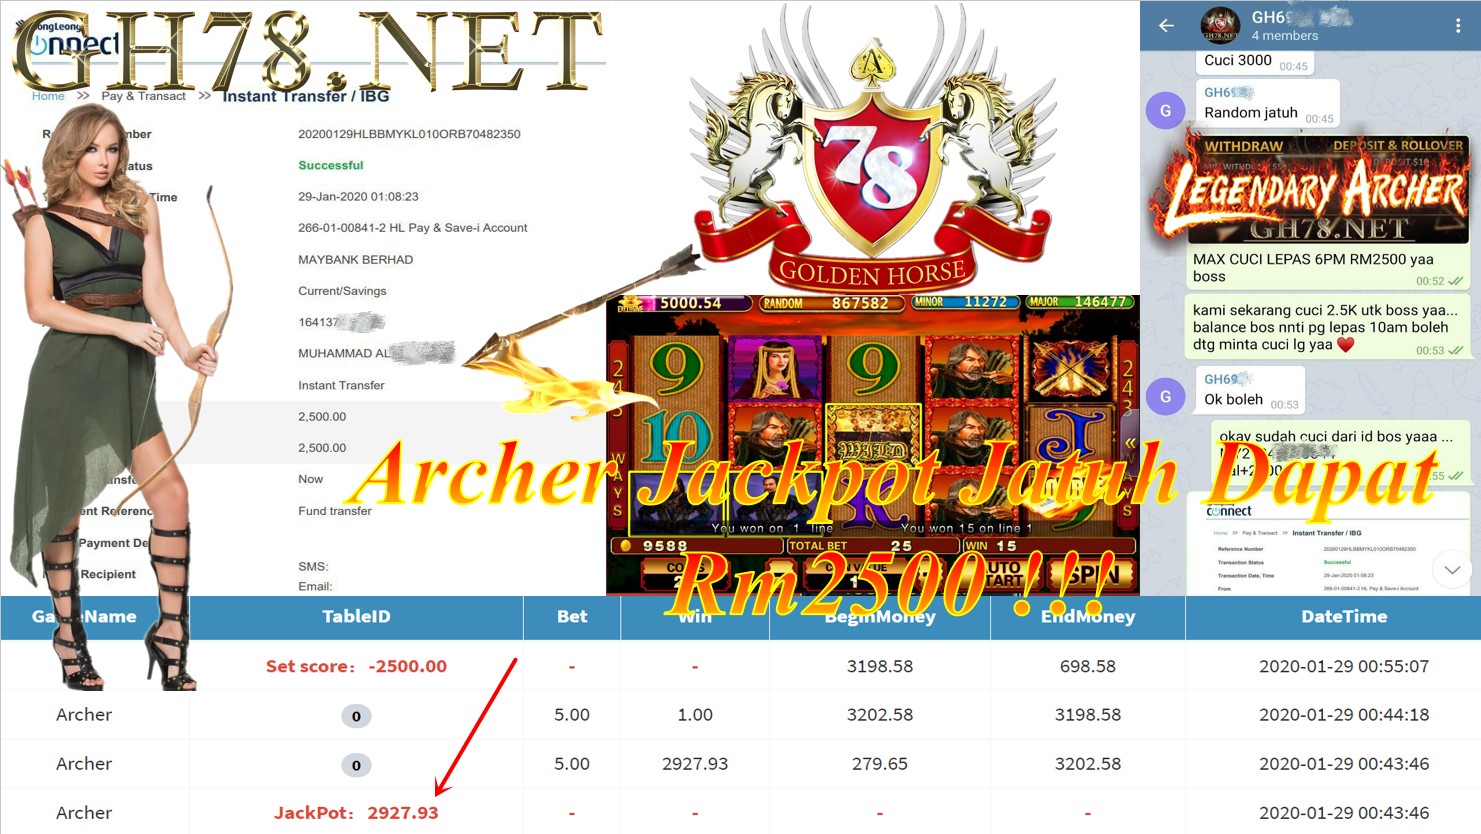 2020 NEW YEAR !!! MEMBER MAIN PUSSY888, ARCHER , WITHDRAW RM2500!!!!	